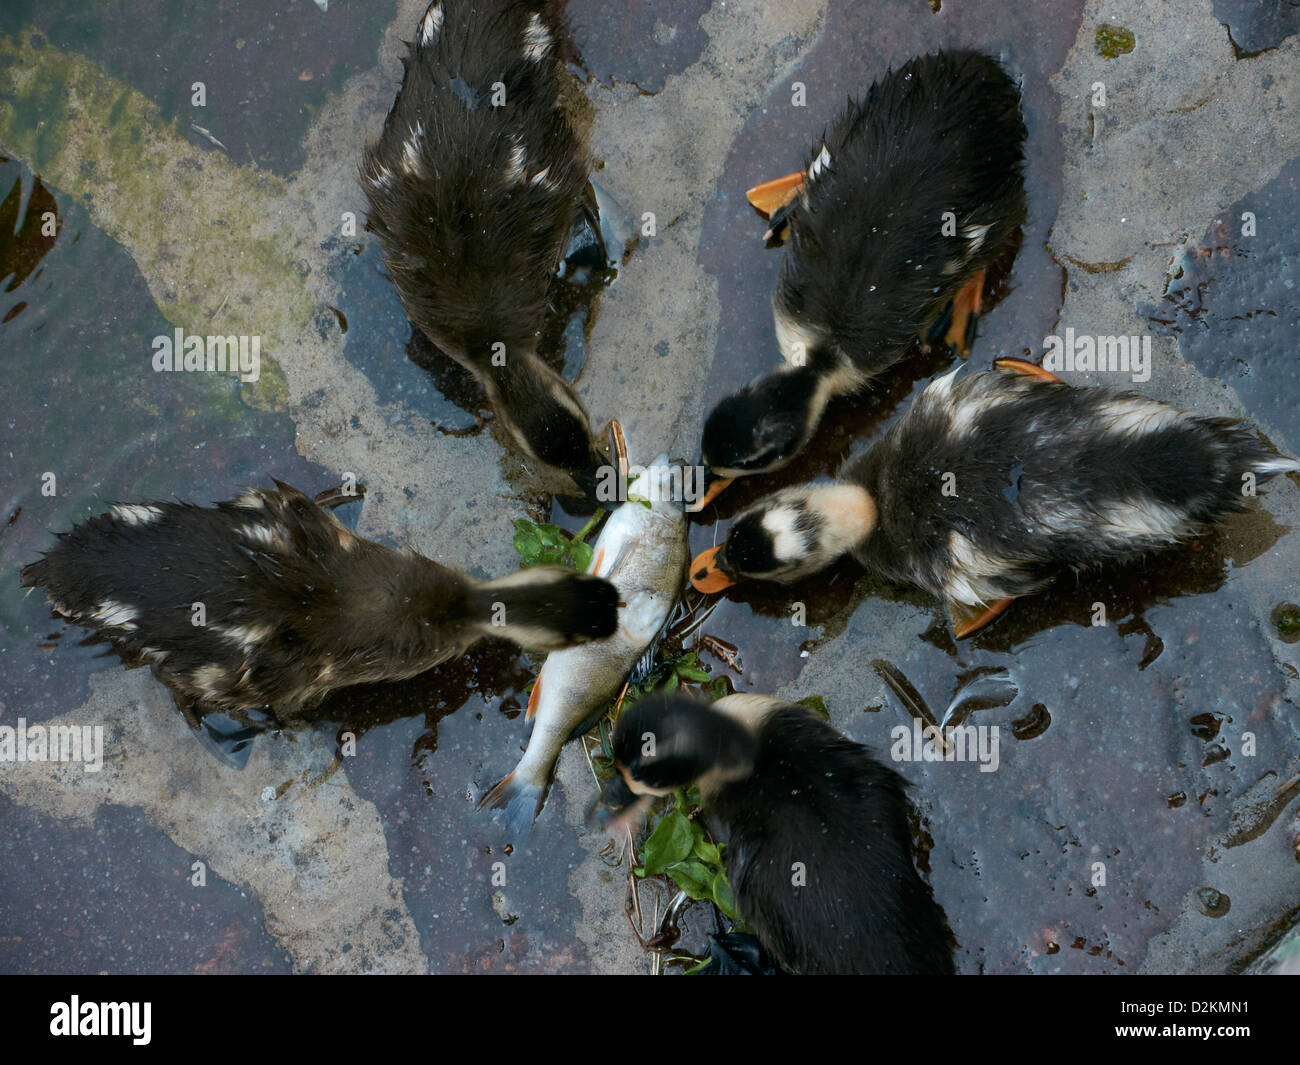 Ducklings pecking at dead fish Stock Photo